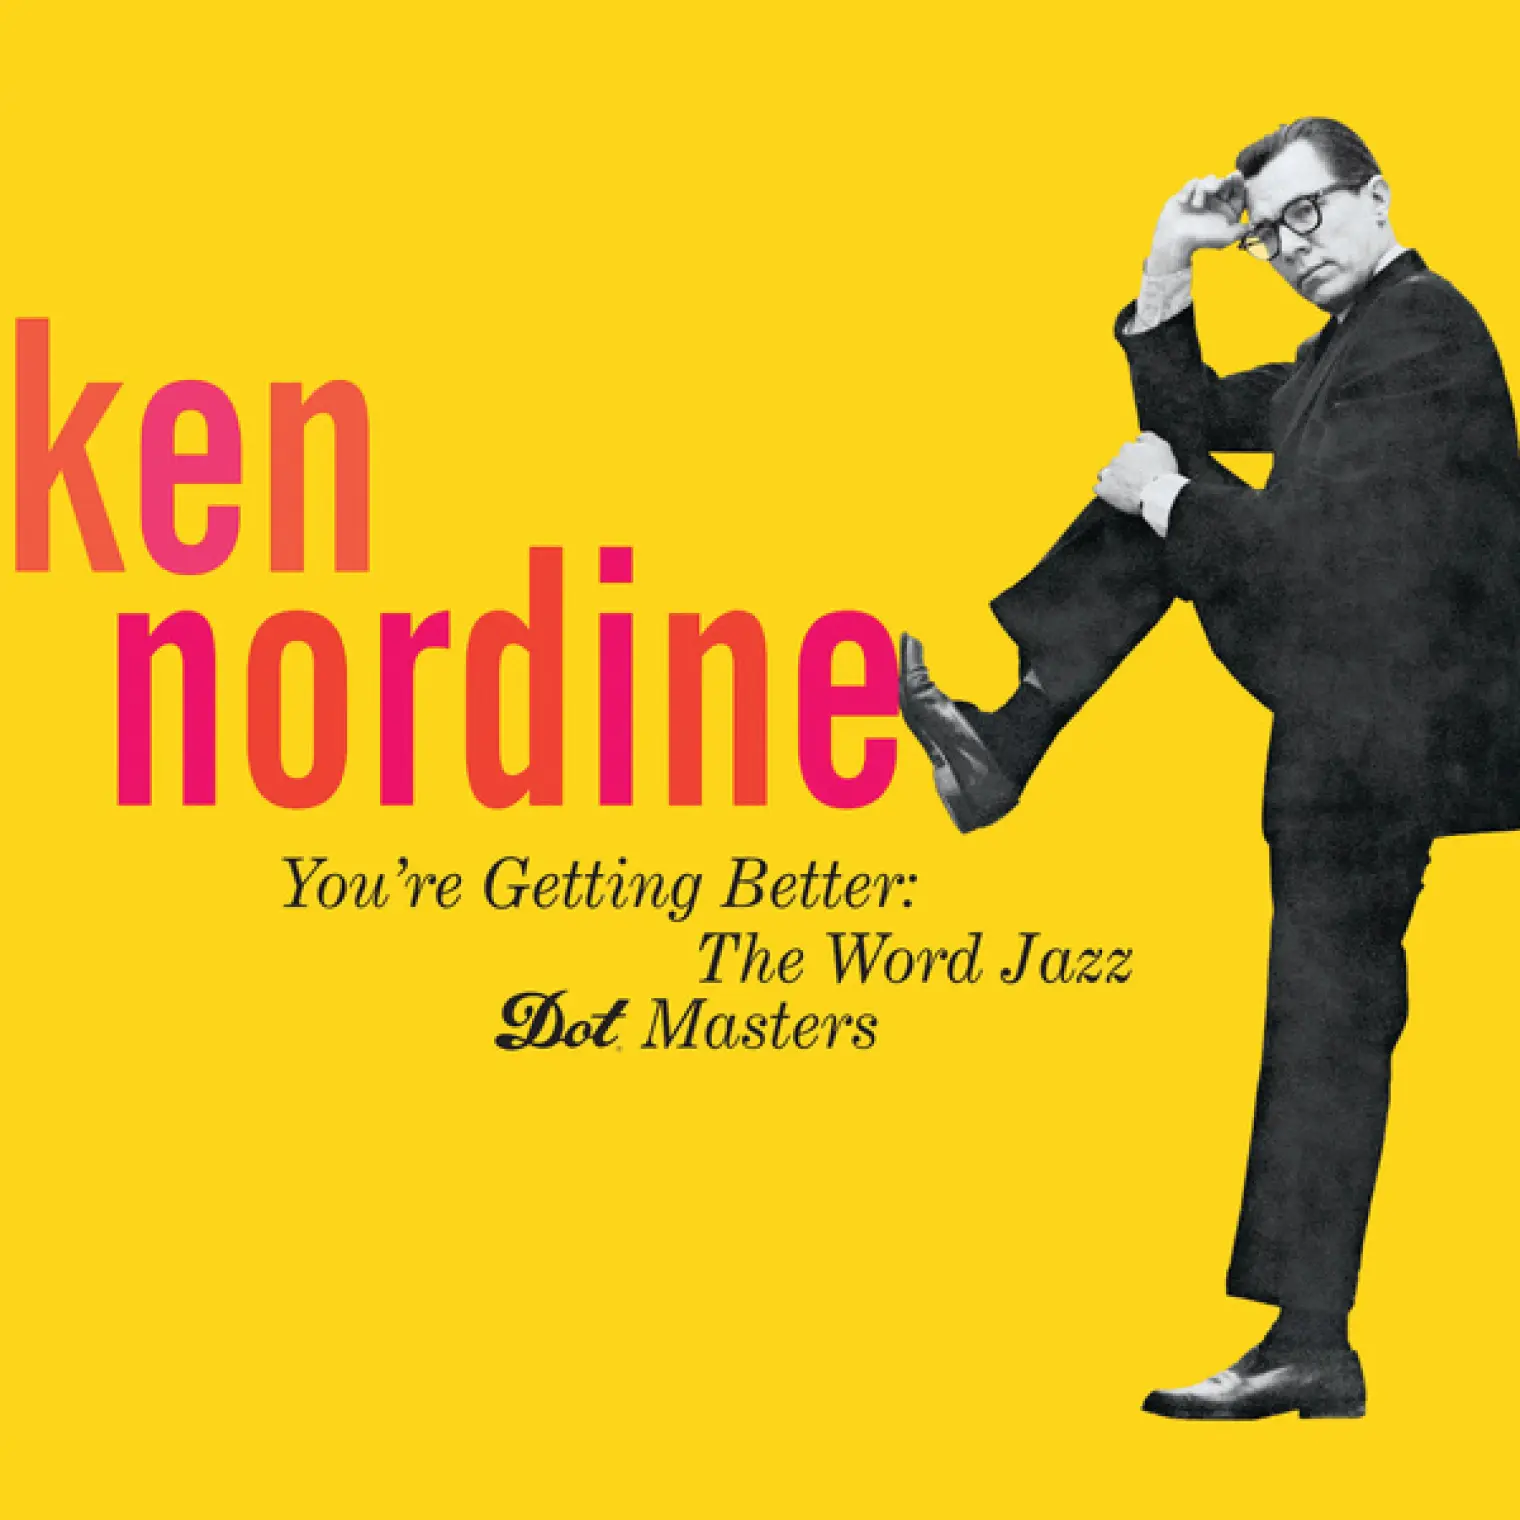 You’re Getting Better: The Word Jazz - Dot Masters -  Ken Nordine 